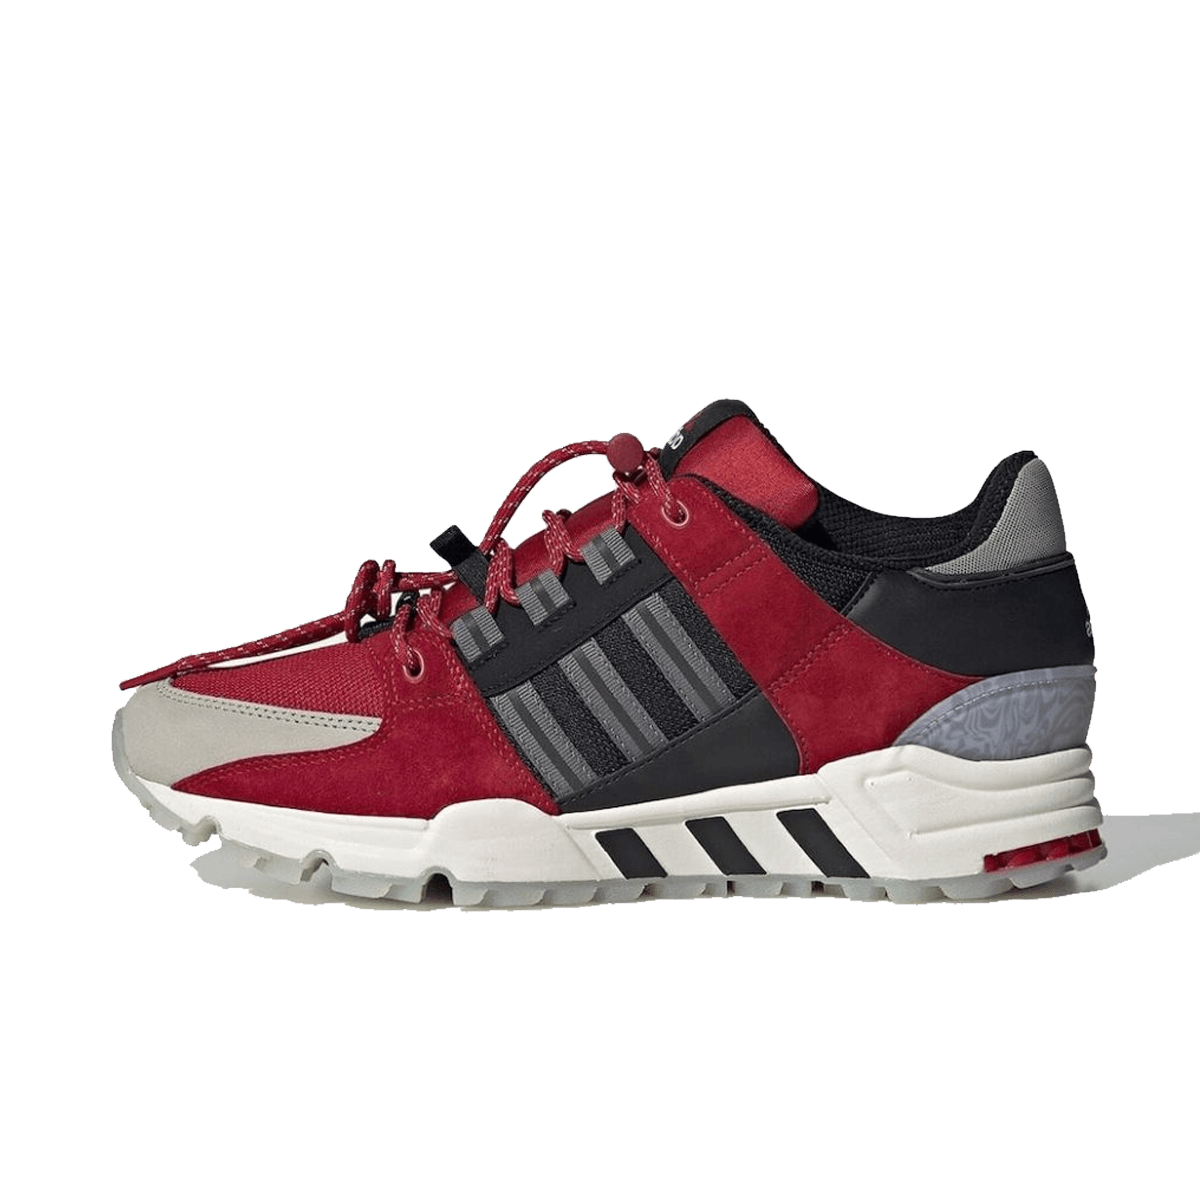 adidas EQT Support 93 'Swiss Army Knife'